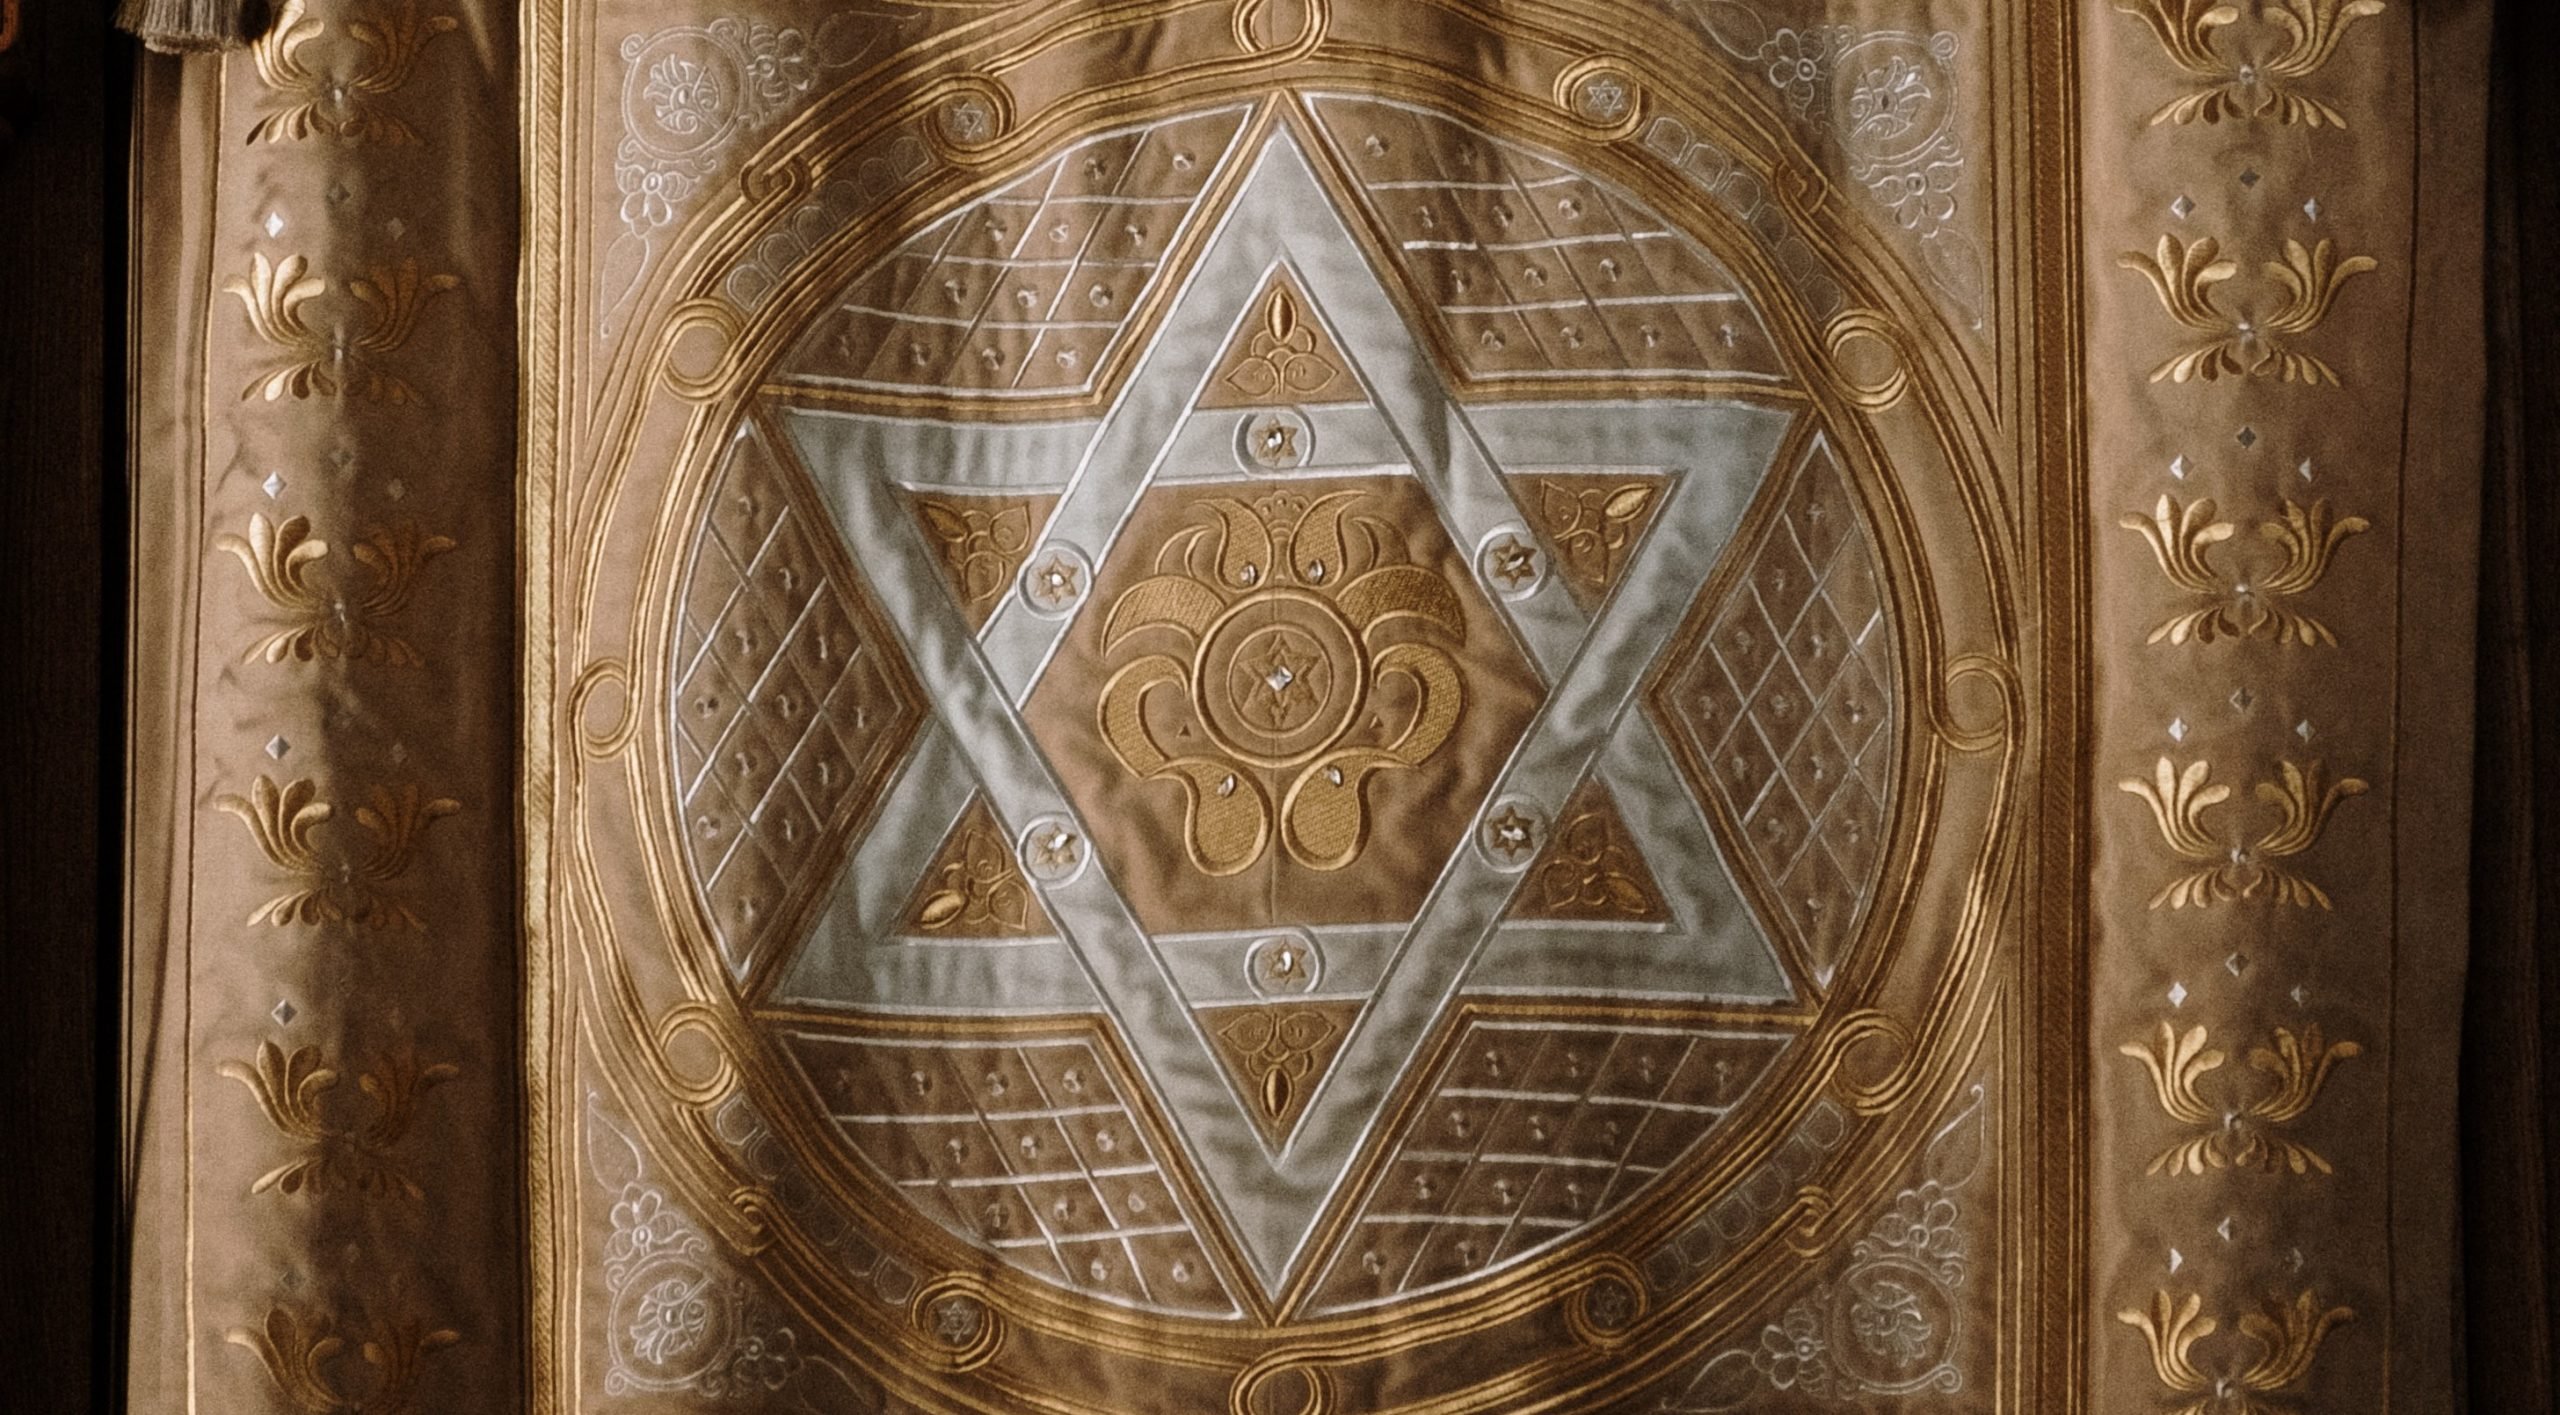 Everything You've Wanted to Know About the Star of David